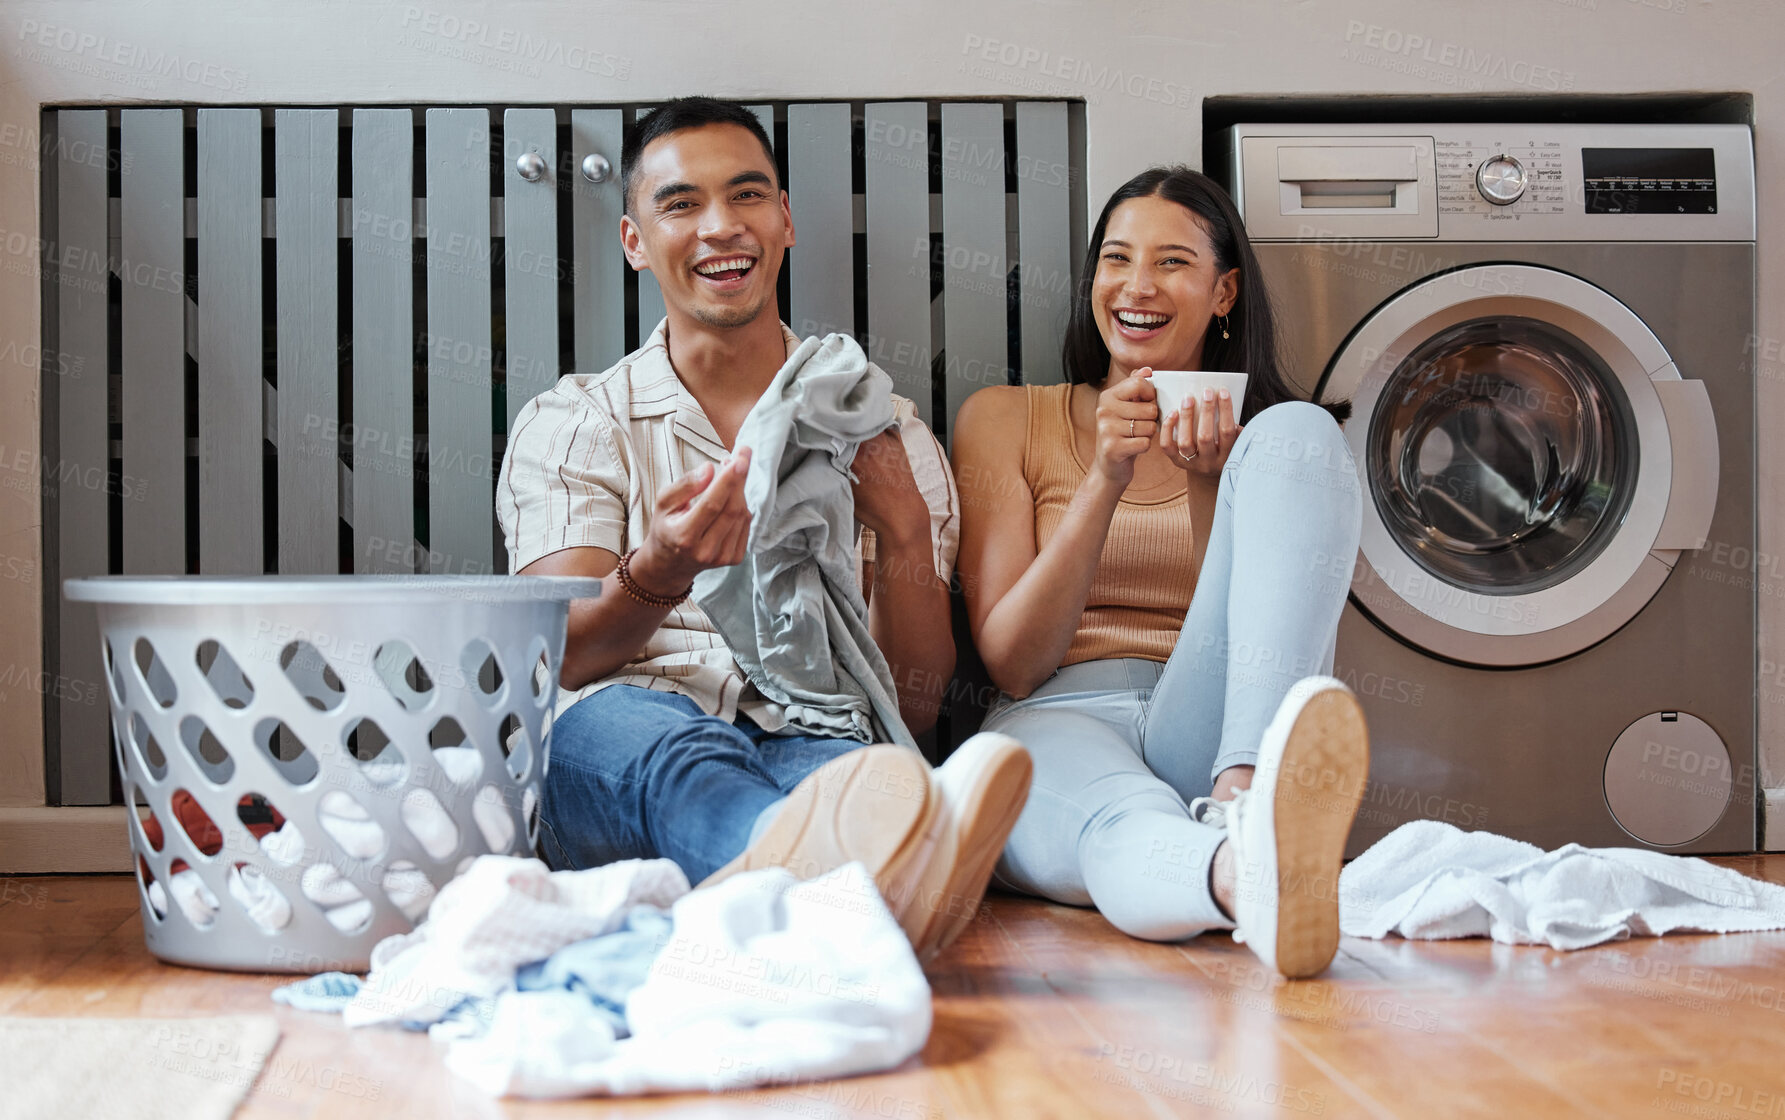 Buy stock photo Happy, relaxed and responsible couple doing laundry, household chores or cleaning together on the weekend at home. Young millennial boyfriend and girlfriend enjoying their new modern washing machine